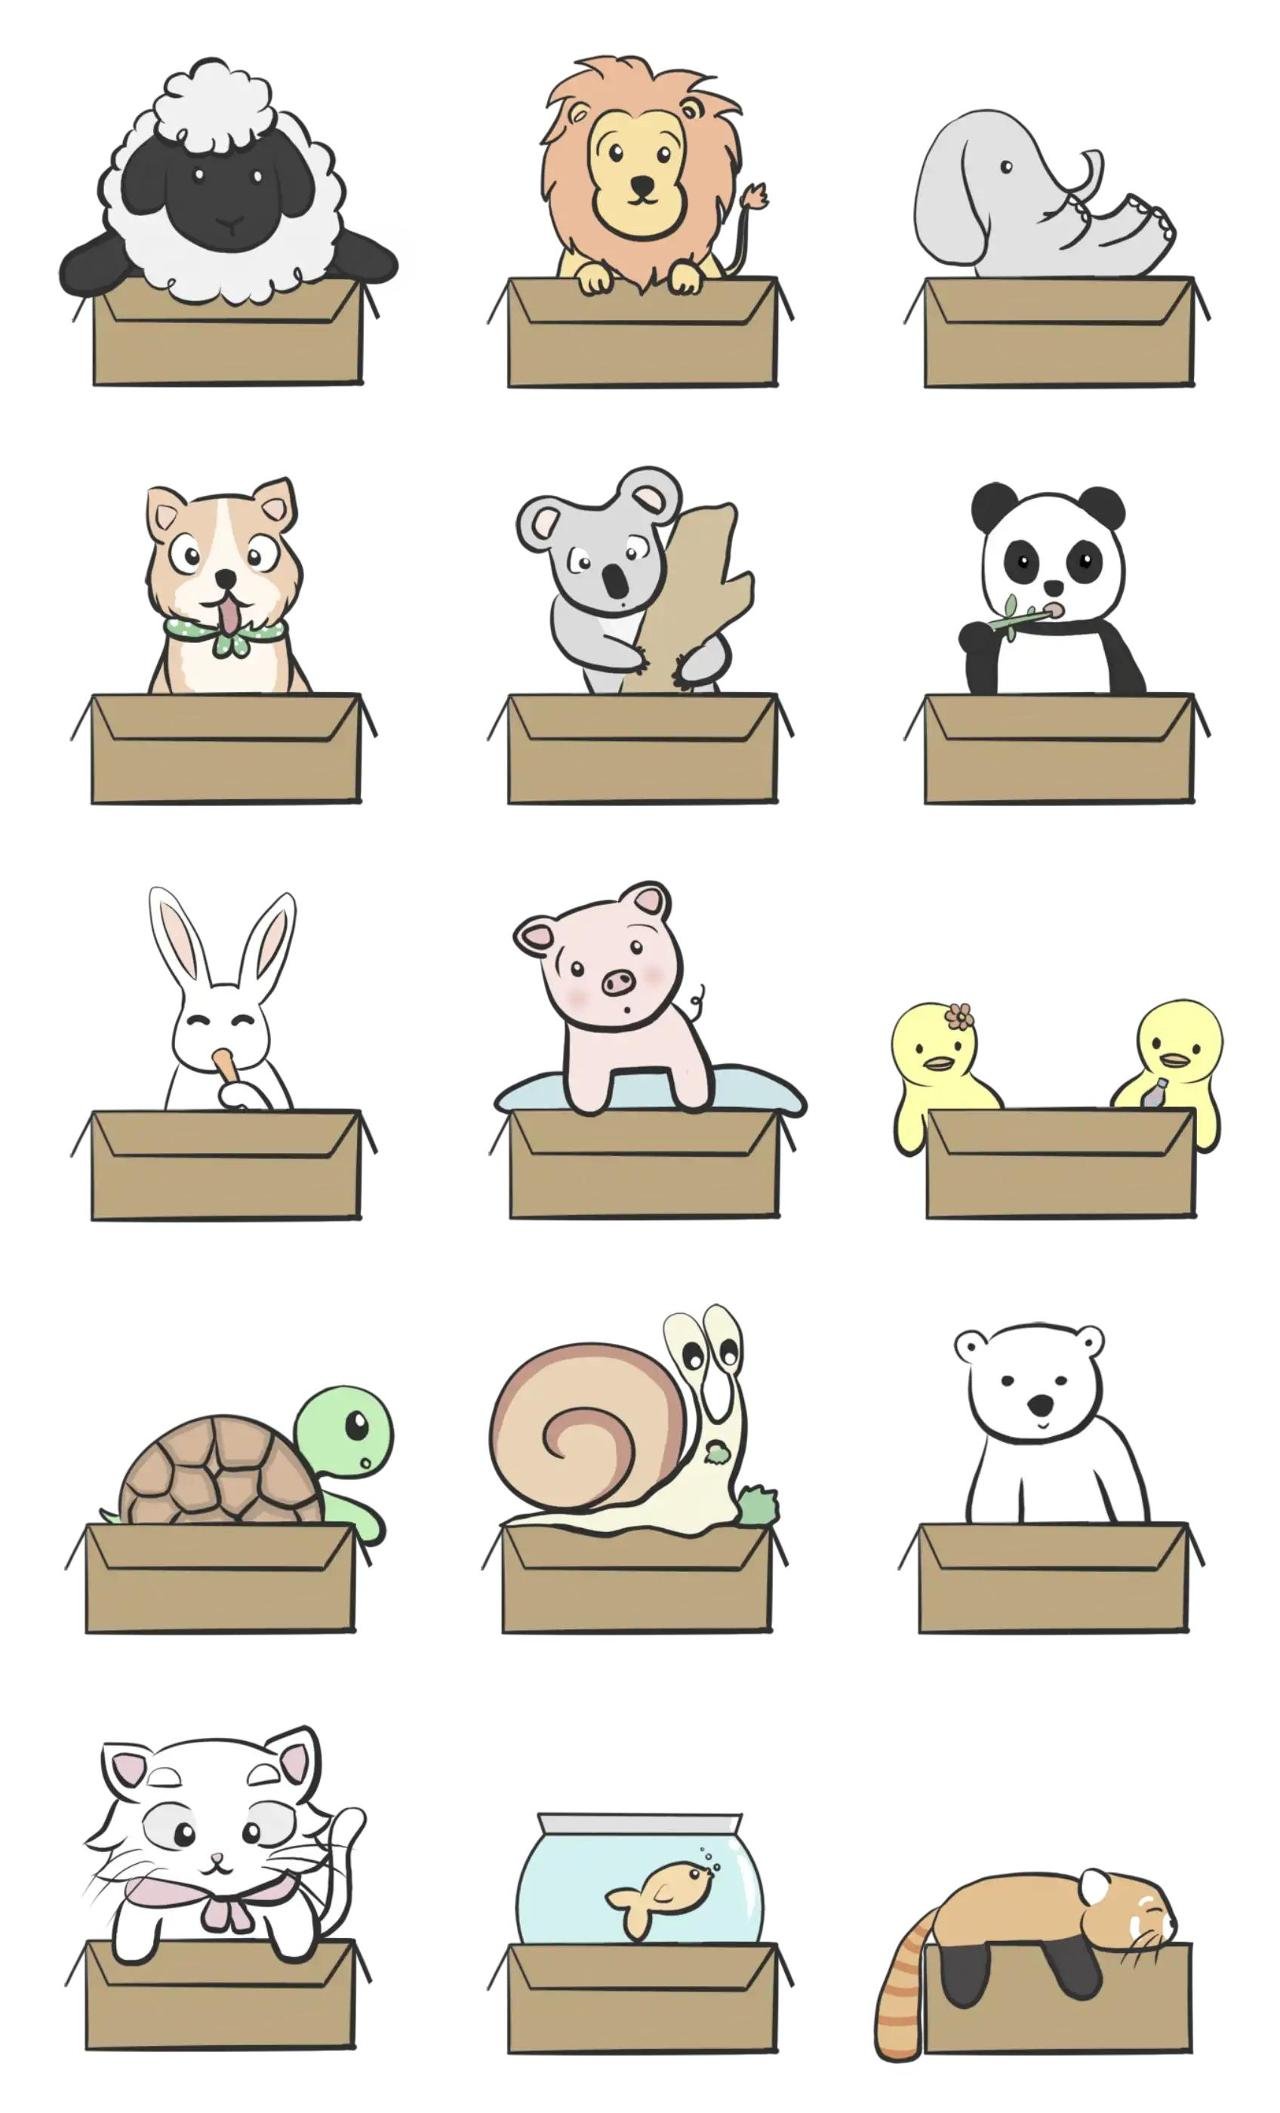 Box full of animals Animals sticker pack for Whatsapp, Telegram, Signal, and others chatting and message apps